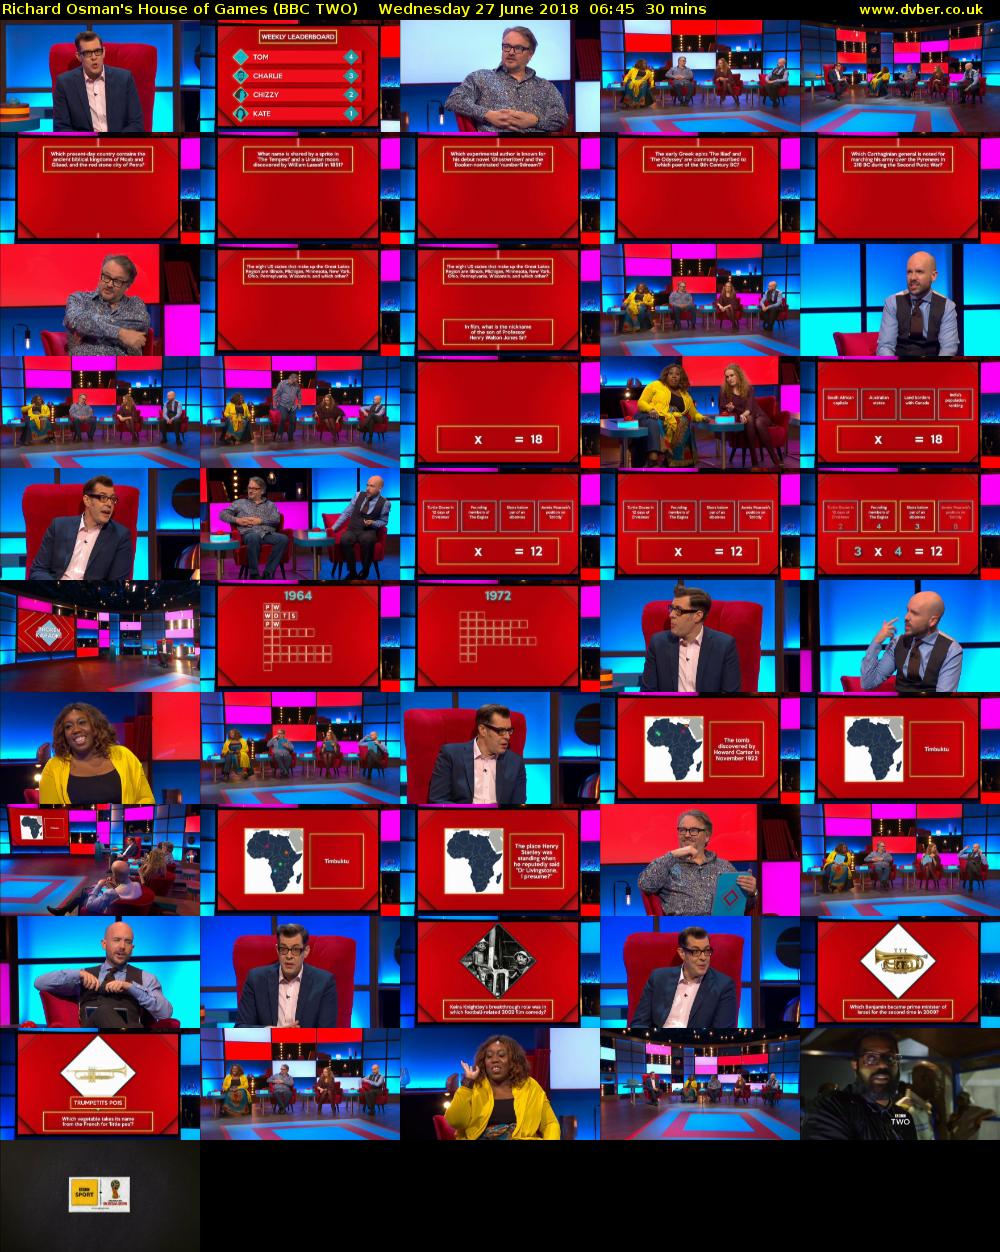 Richard Osman's House of Games (BBC TWO) Wednesday 27 June 2018 06:45 - 07:15